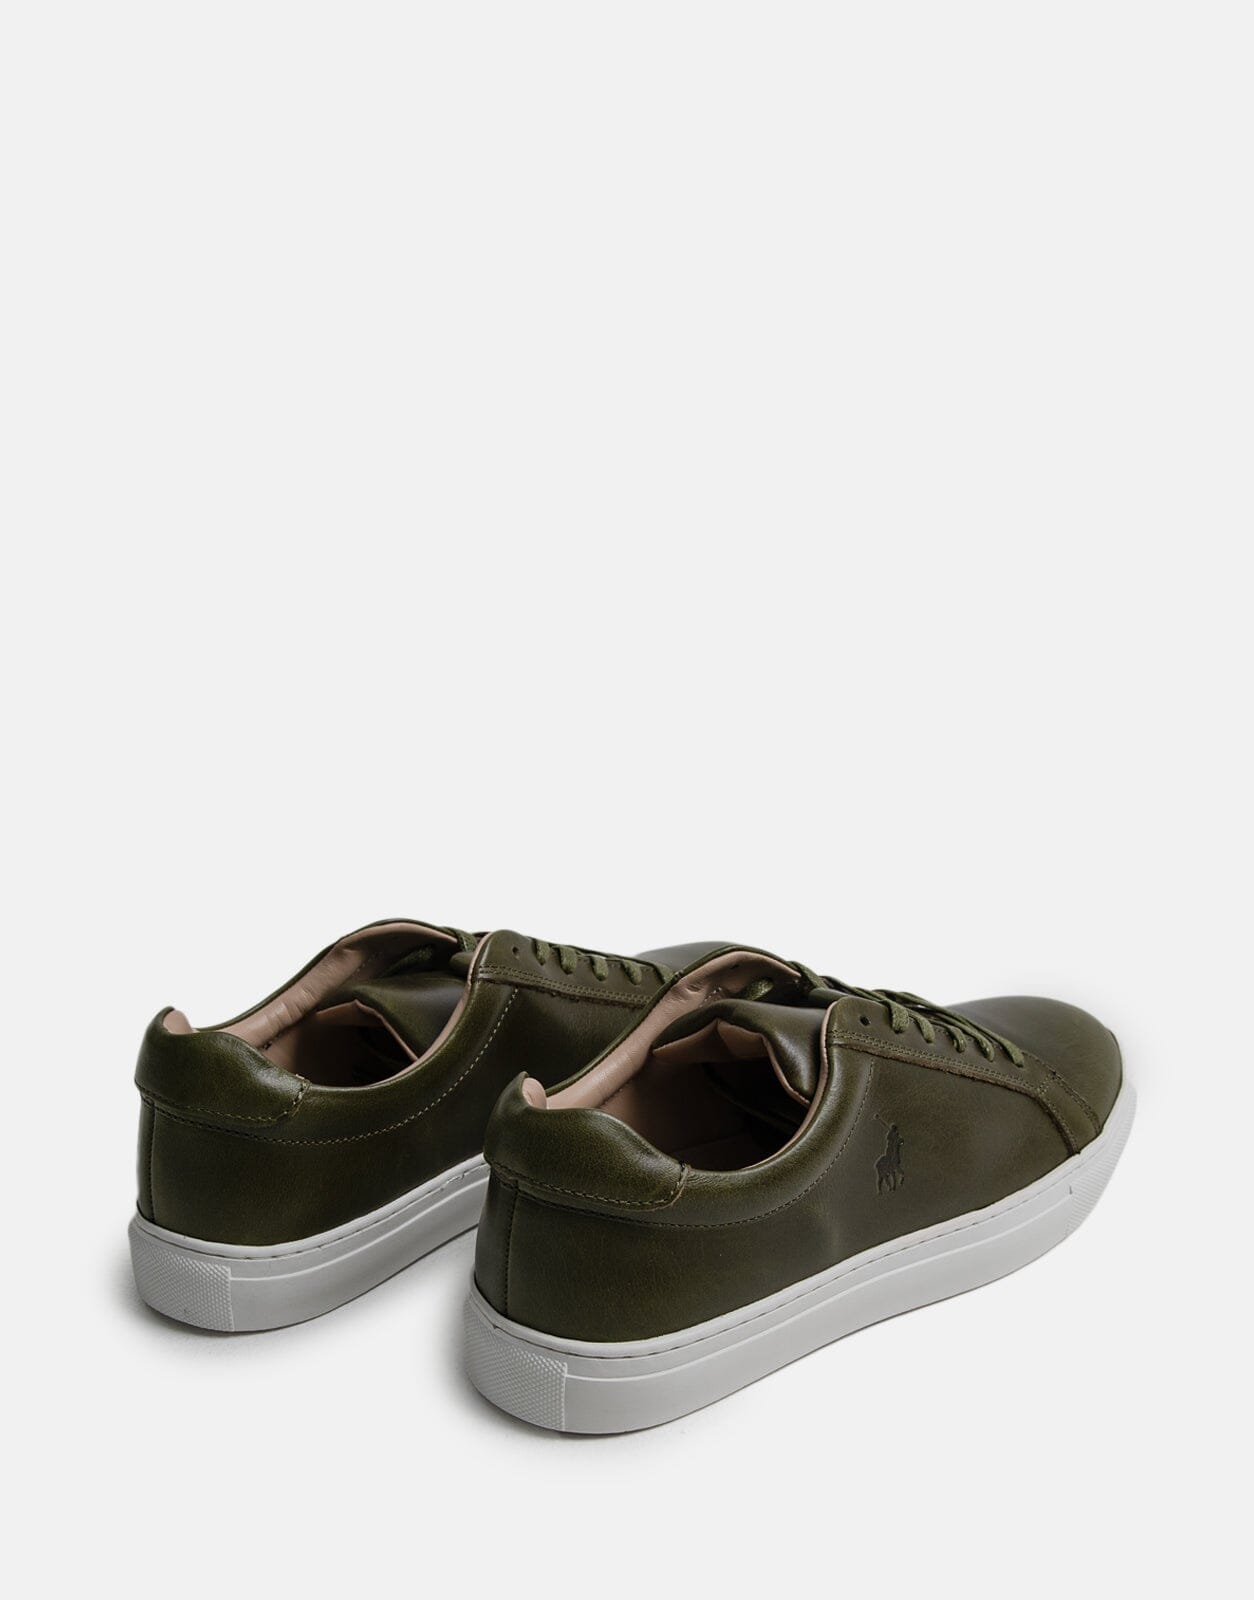 Polo Classic Leather Olive Sneakers - Subwear